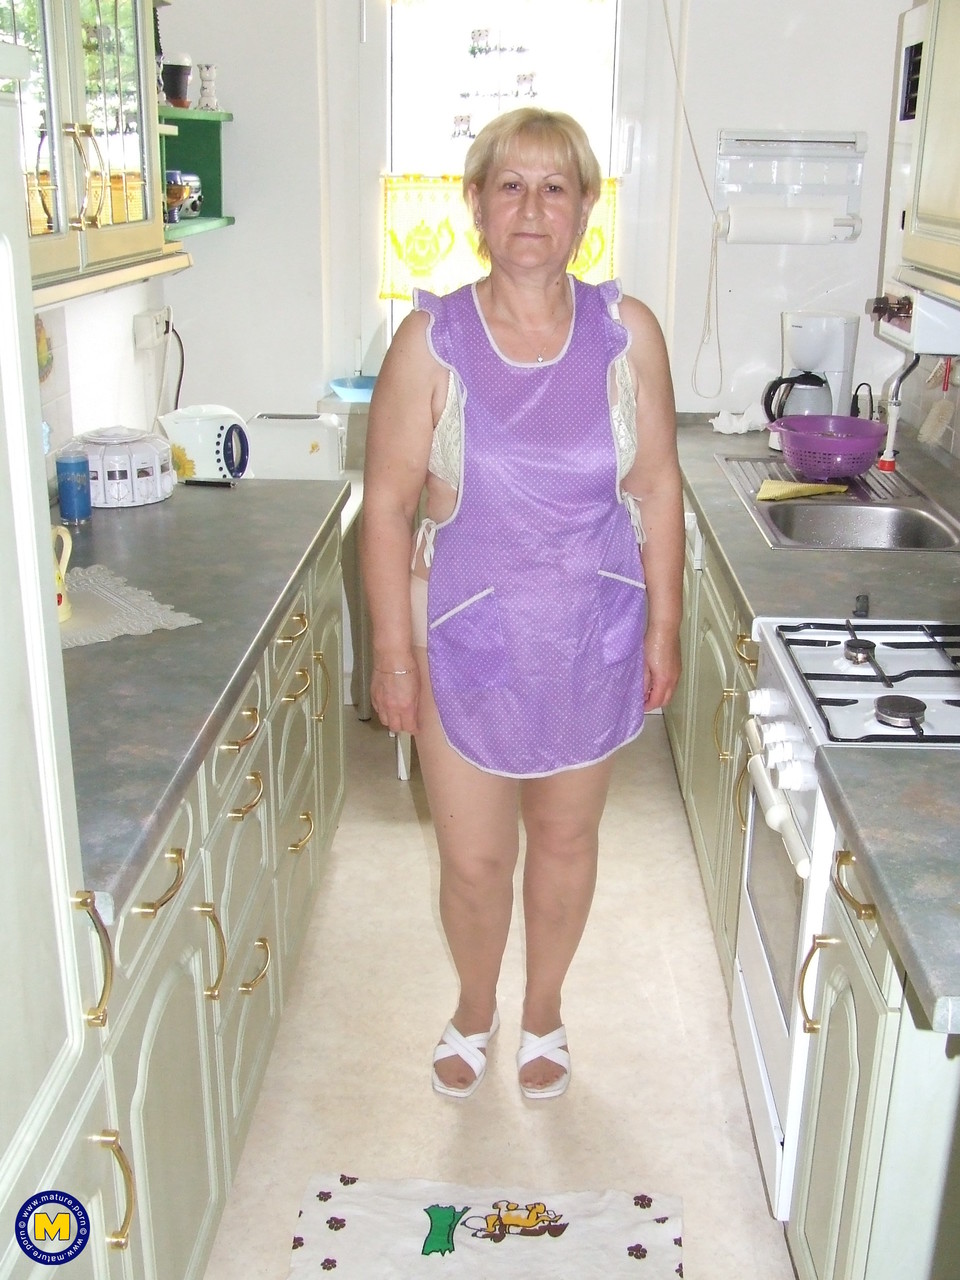 Short haired German cleaning lady Dagmar shows her mature cunt in the kitchen foto porno #425226956 | Mature NL Pics, Dagmar, German, porno móvil